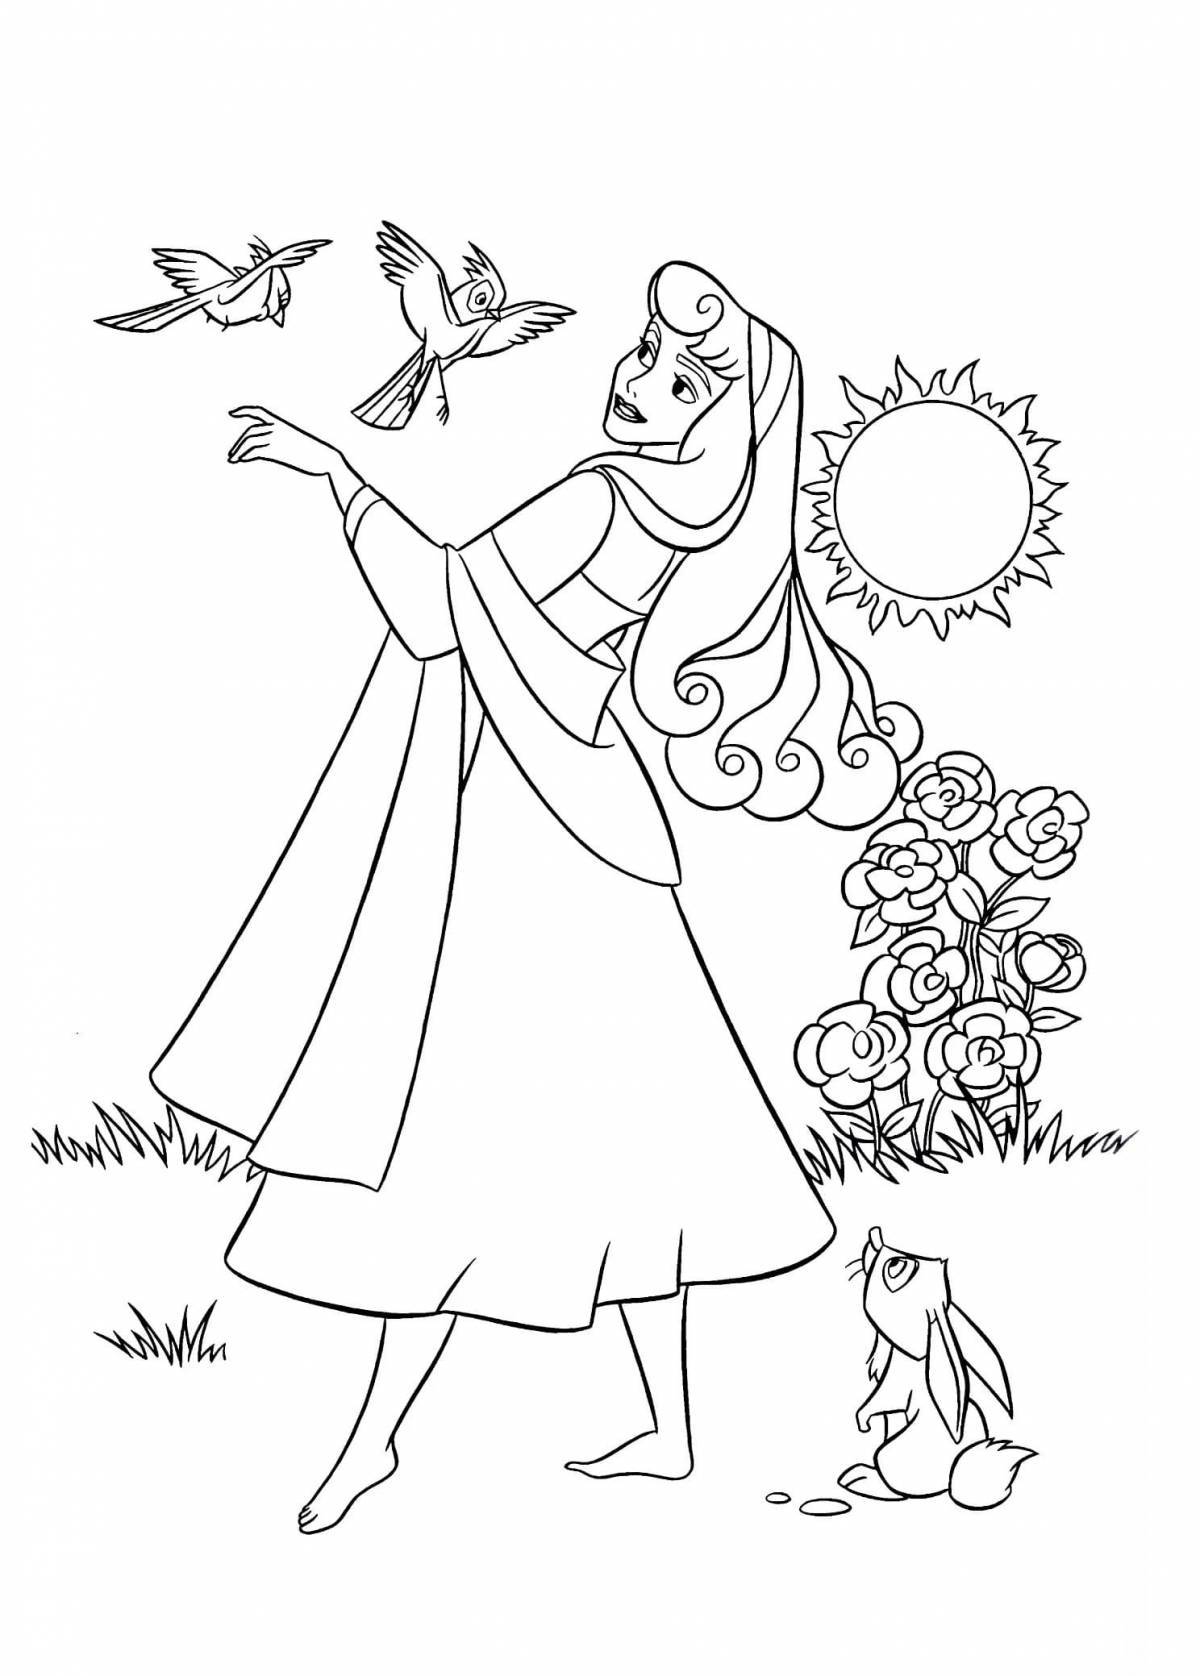 Angelic aurora coloring page